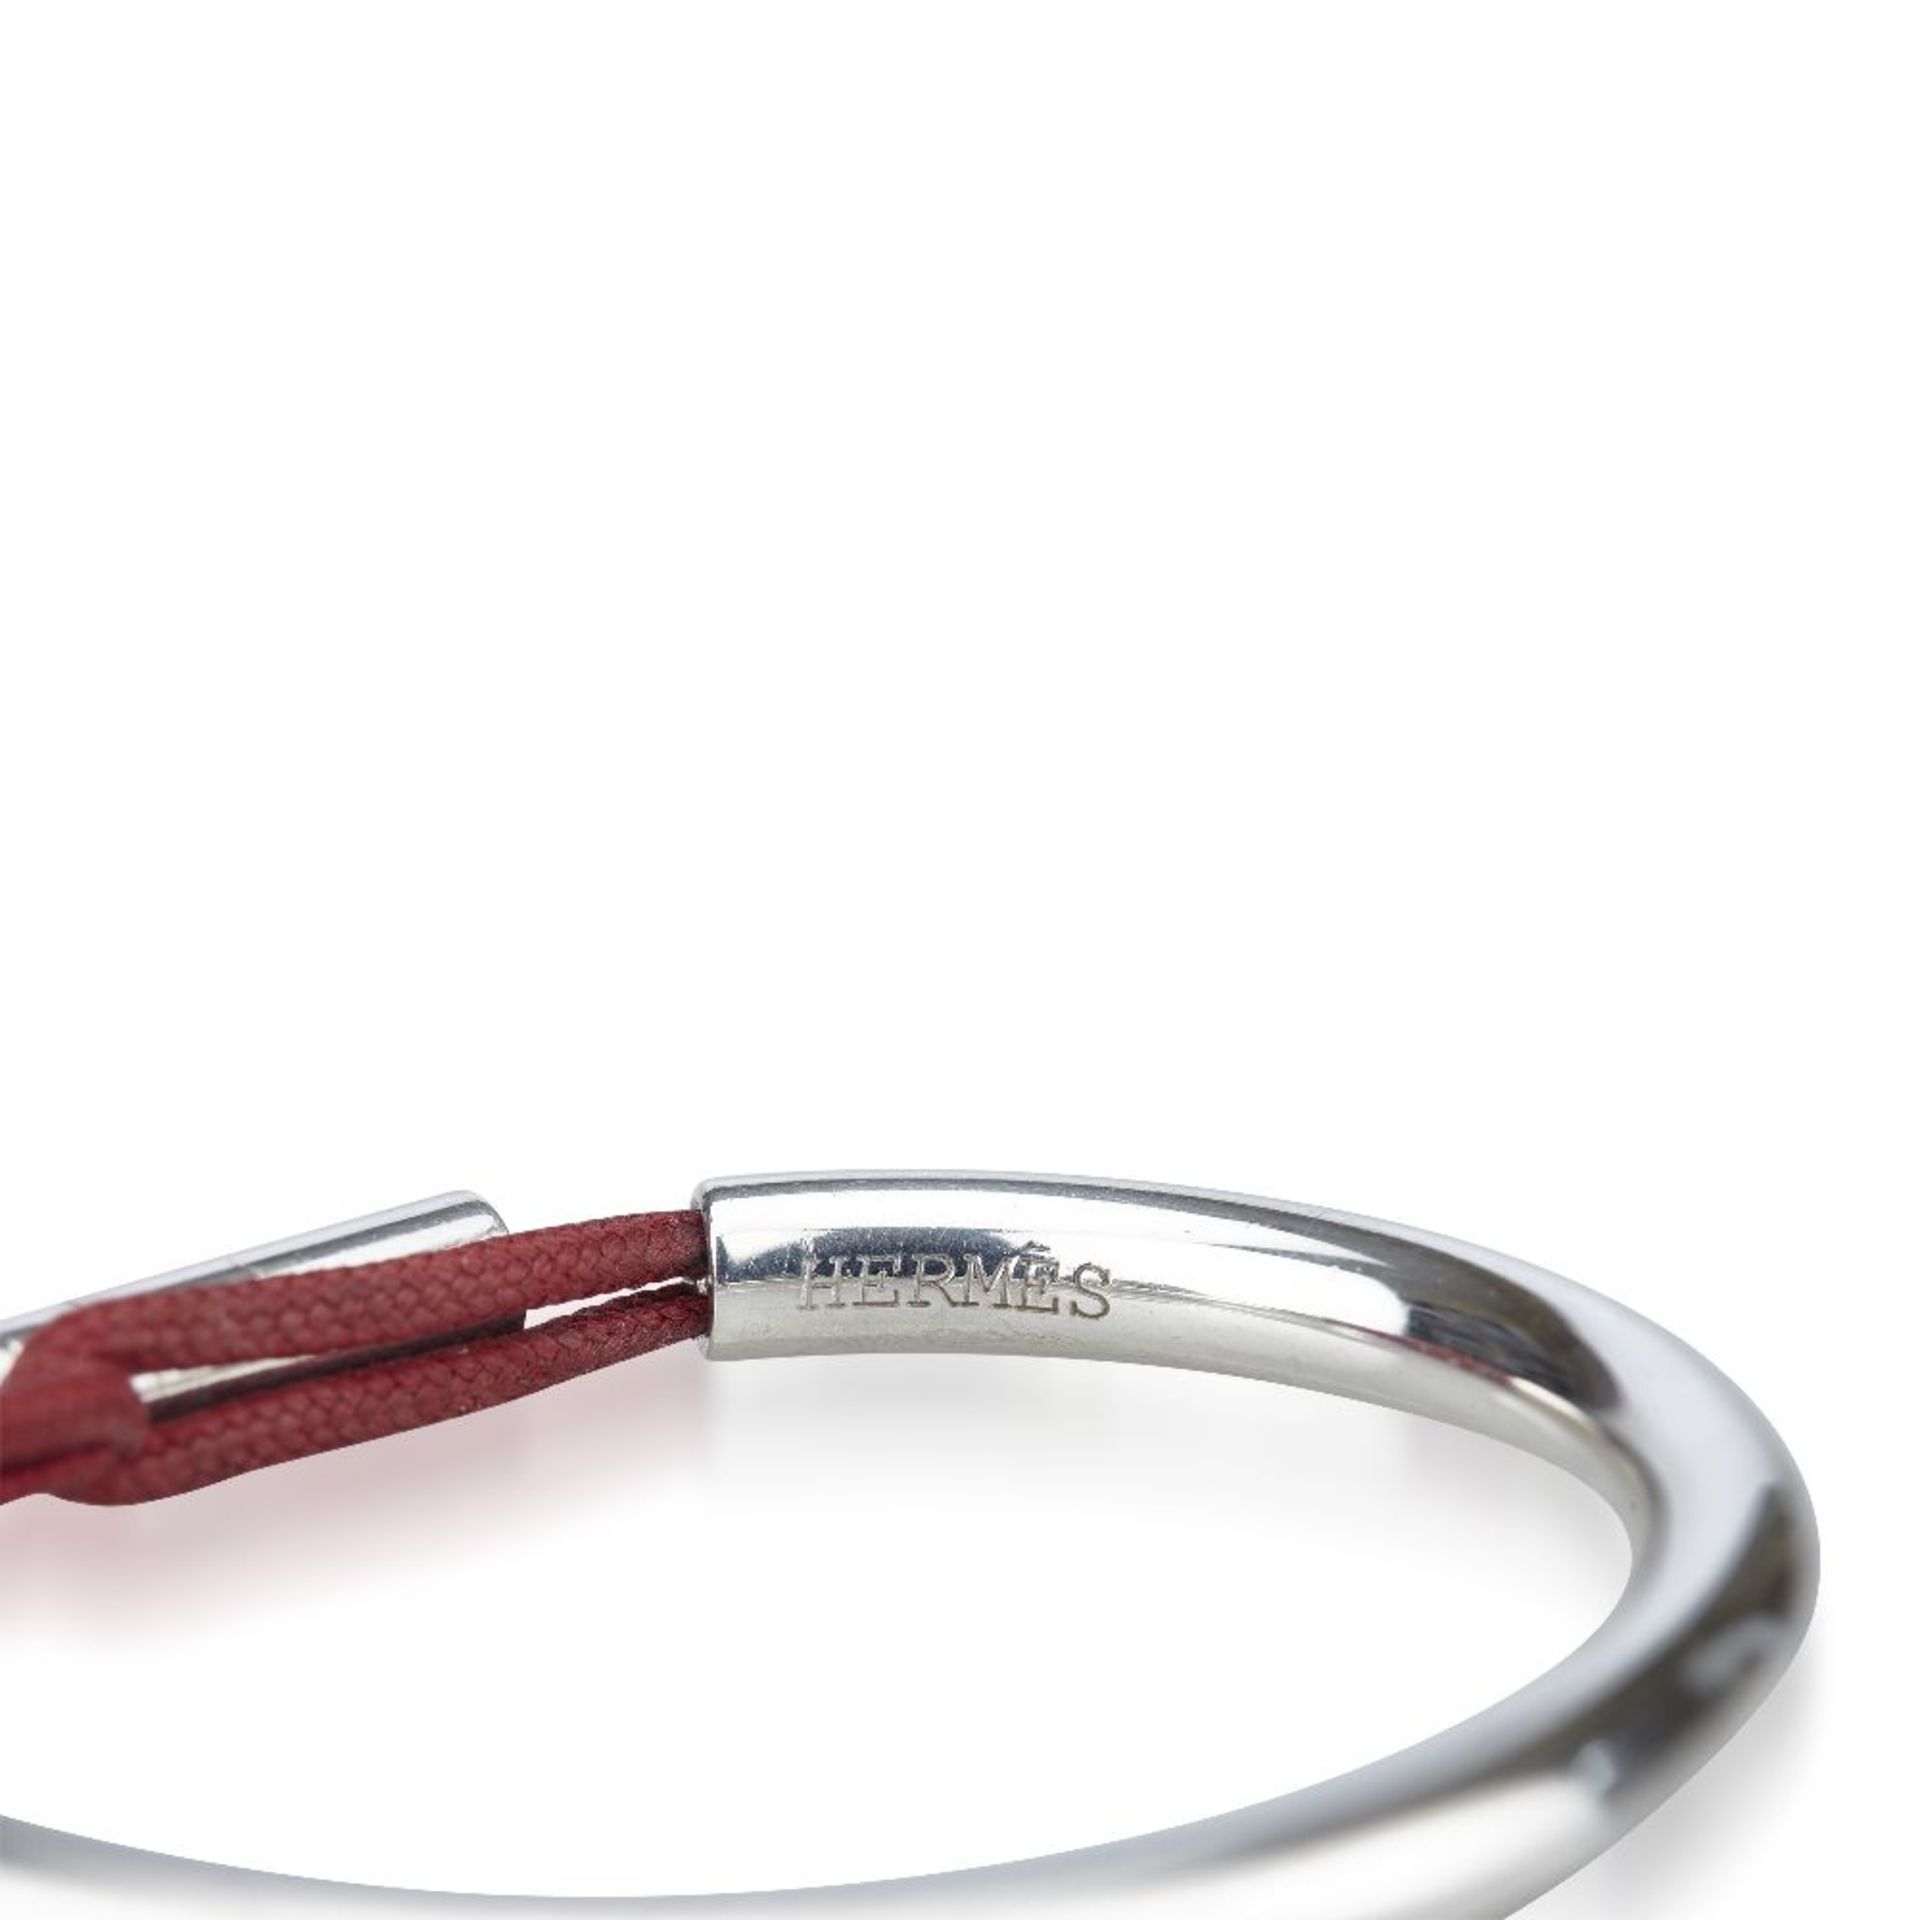 An Hermès 'Skipper' bracelet,featuring a silver and chemical fibre body - Image 4 of 7